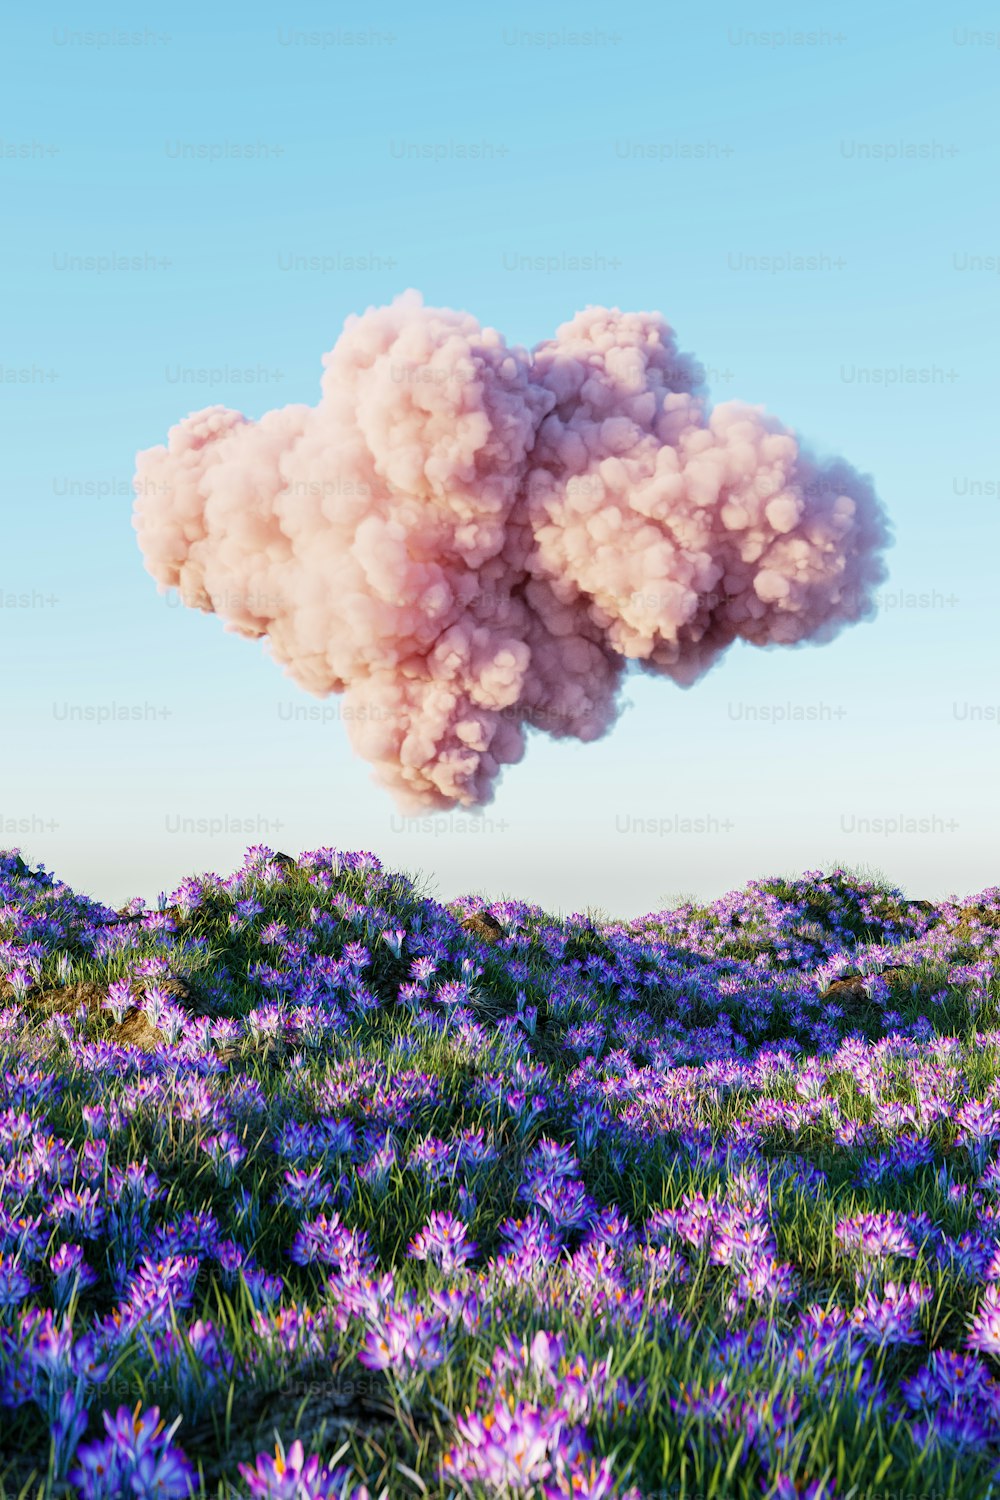 a cloud of smoke is floating over a field of purple flowers